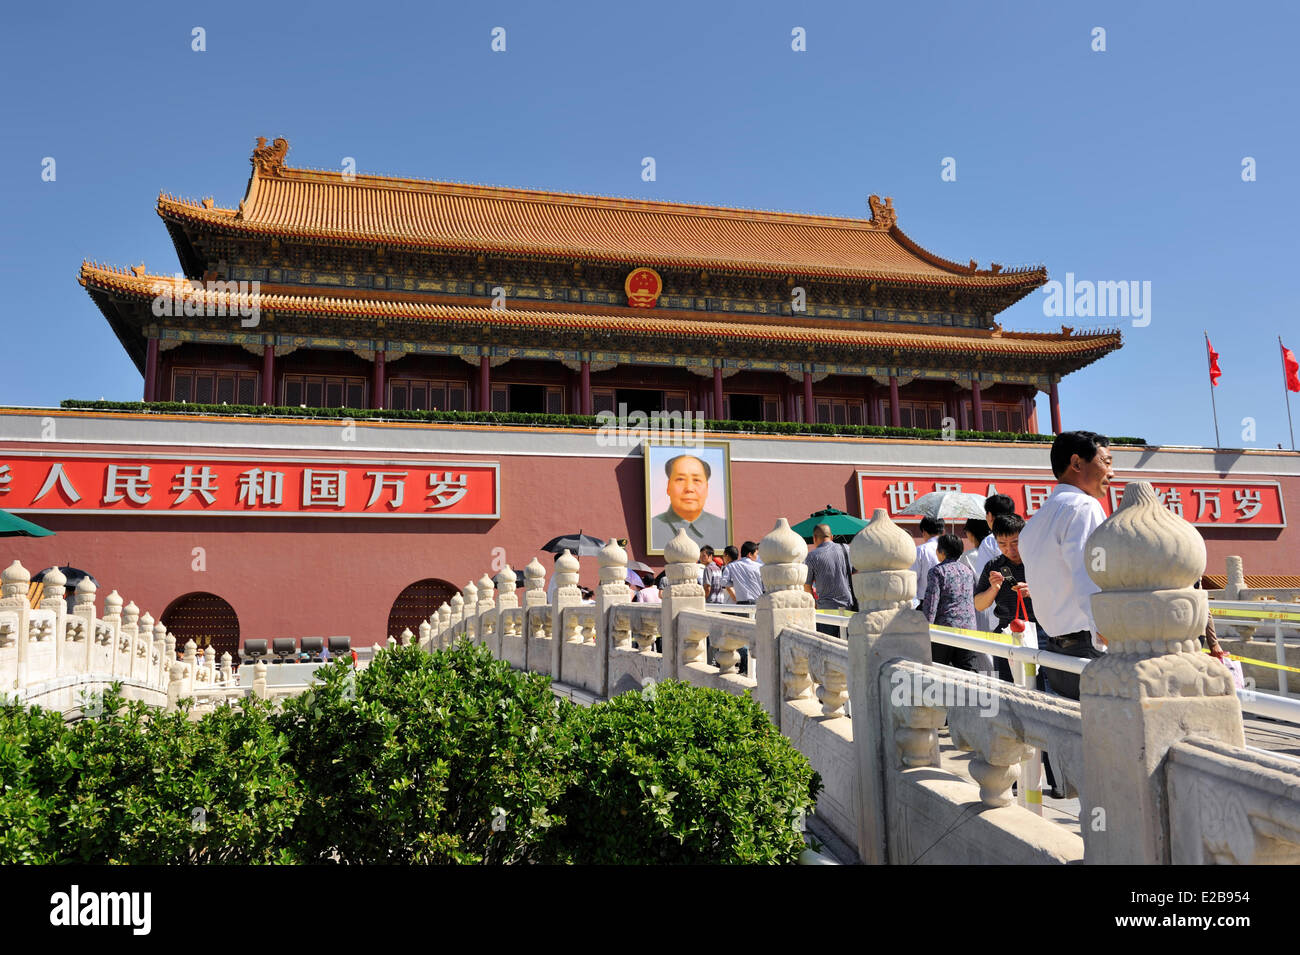 China, Bejing, Imperial palace, Forbidden City, listed as World Heritage by UNESCO, Tian'AnMen gate at Tian'AnMen square Stock Photo